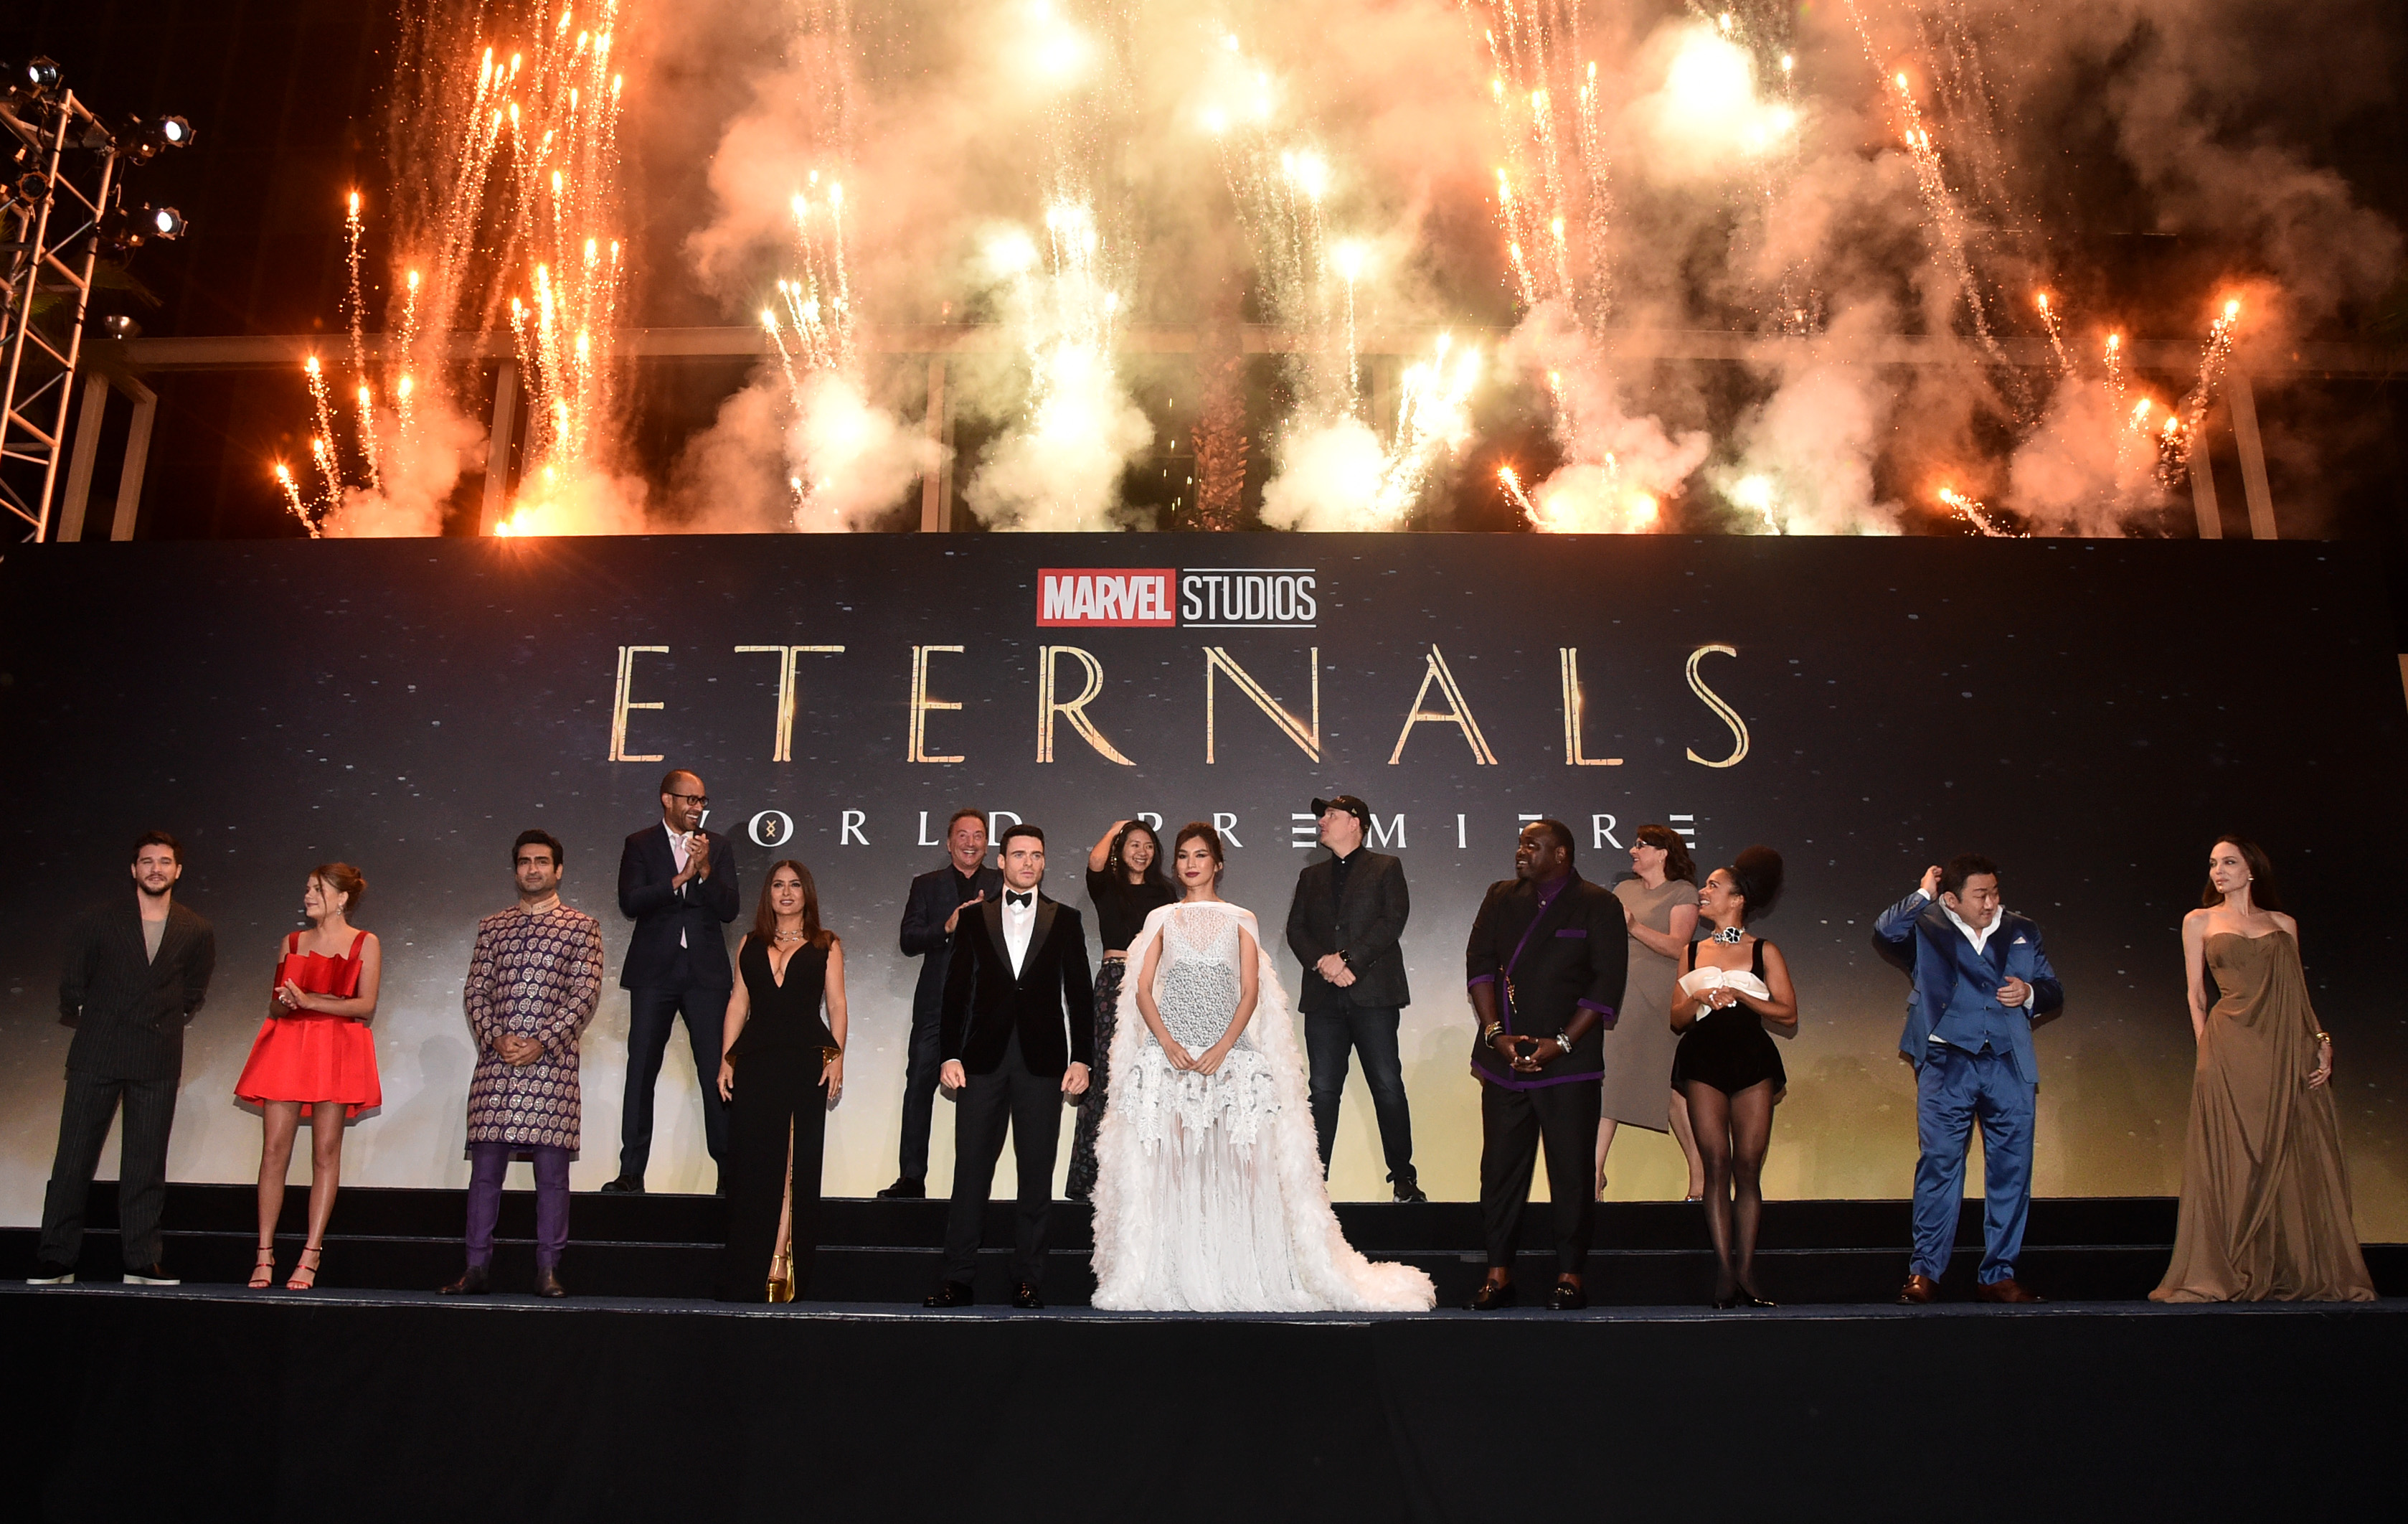 The cast and crew of Marvel's 'Eternals,' including director Chloé Zhao, pose for pictures in front of a poster for the film as fireworks go off behind them. 